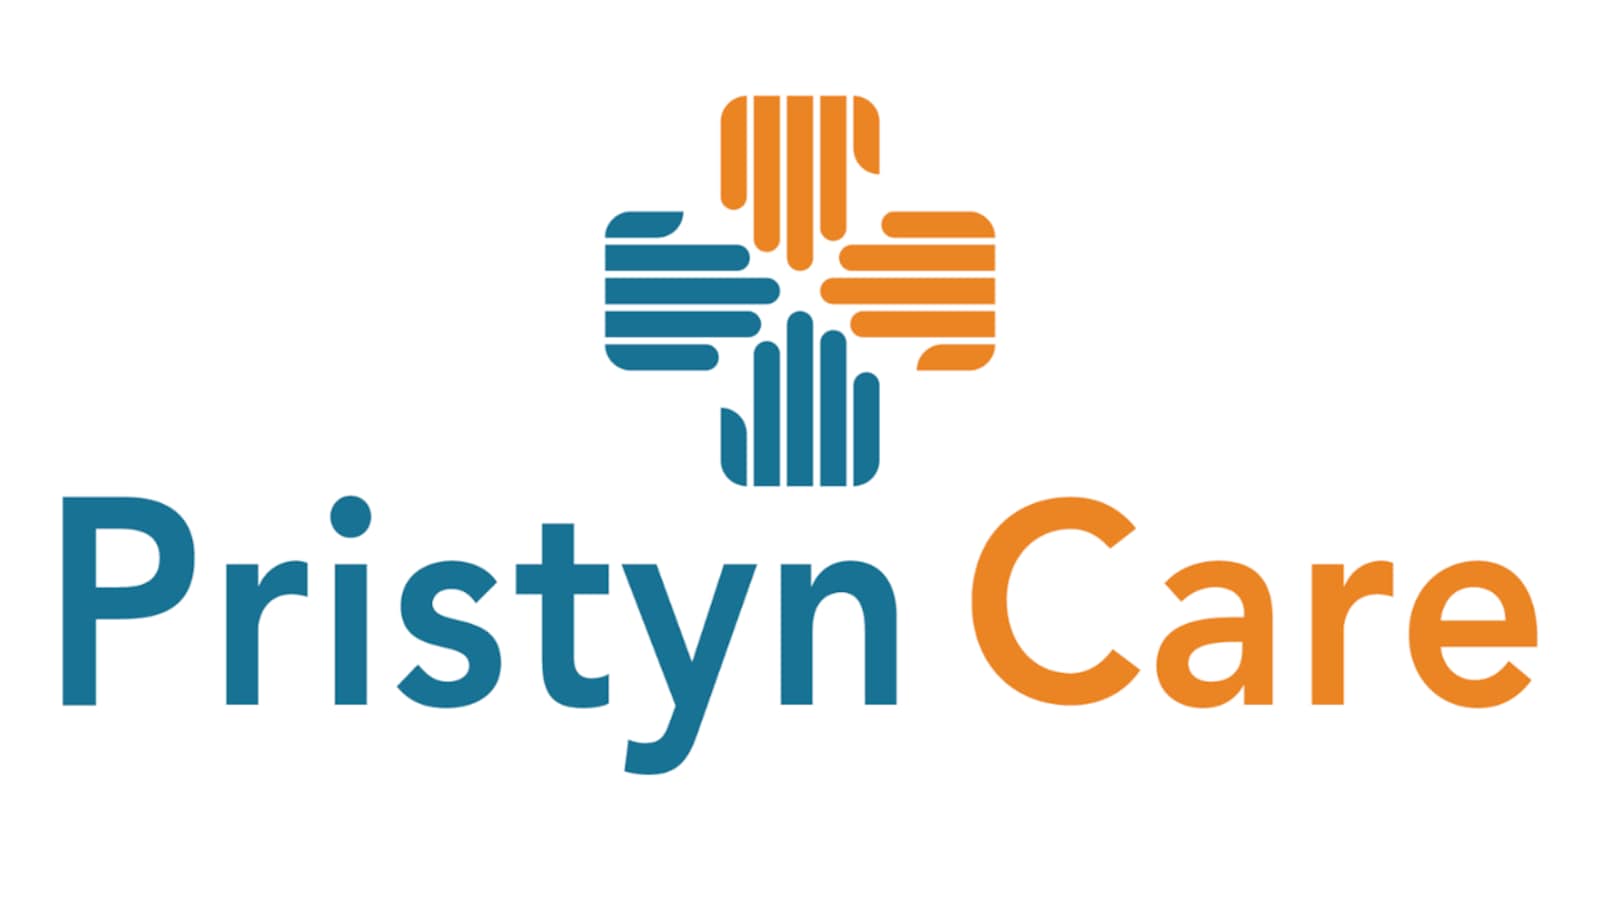 Pristyn Care raises $53 million in funding round led by Tiger Global